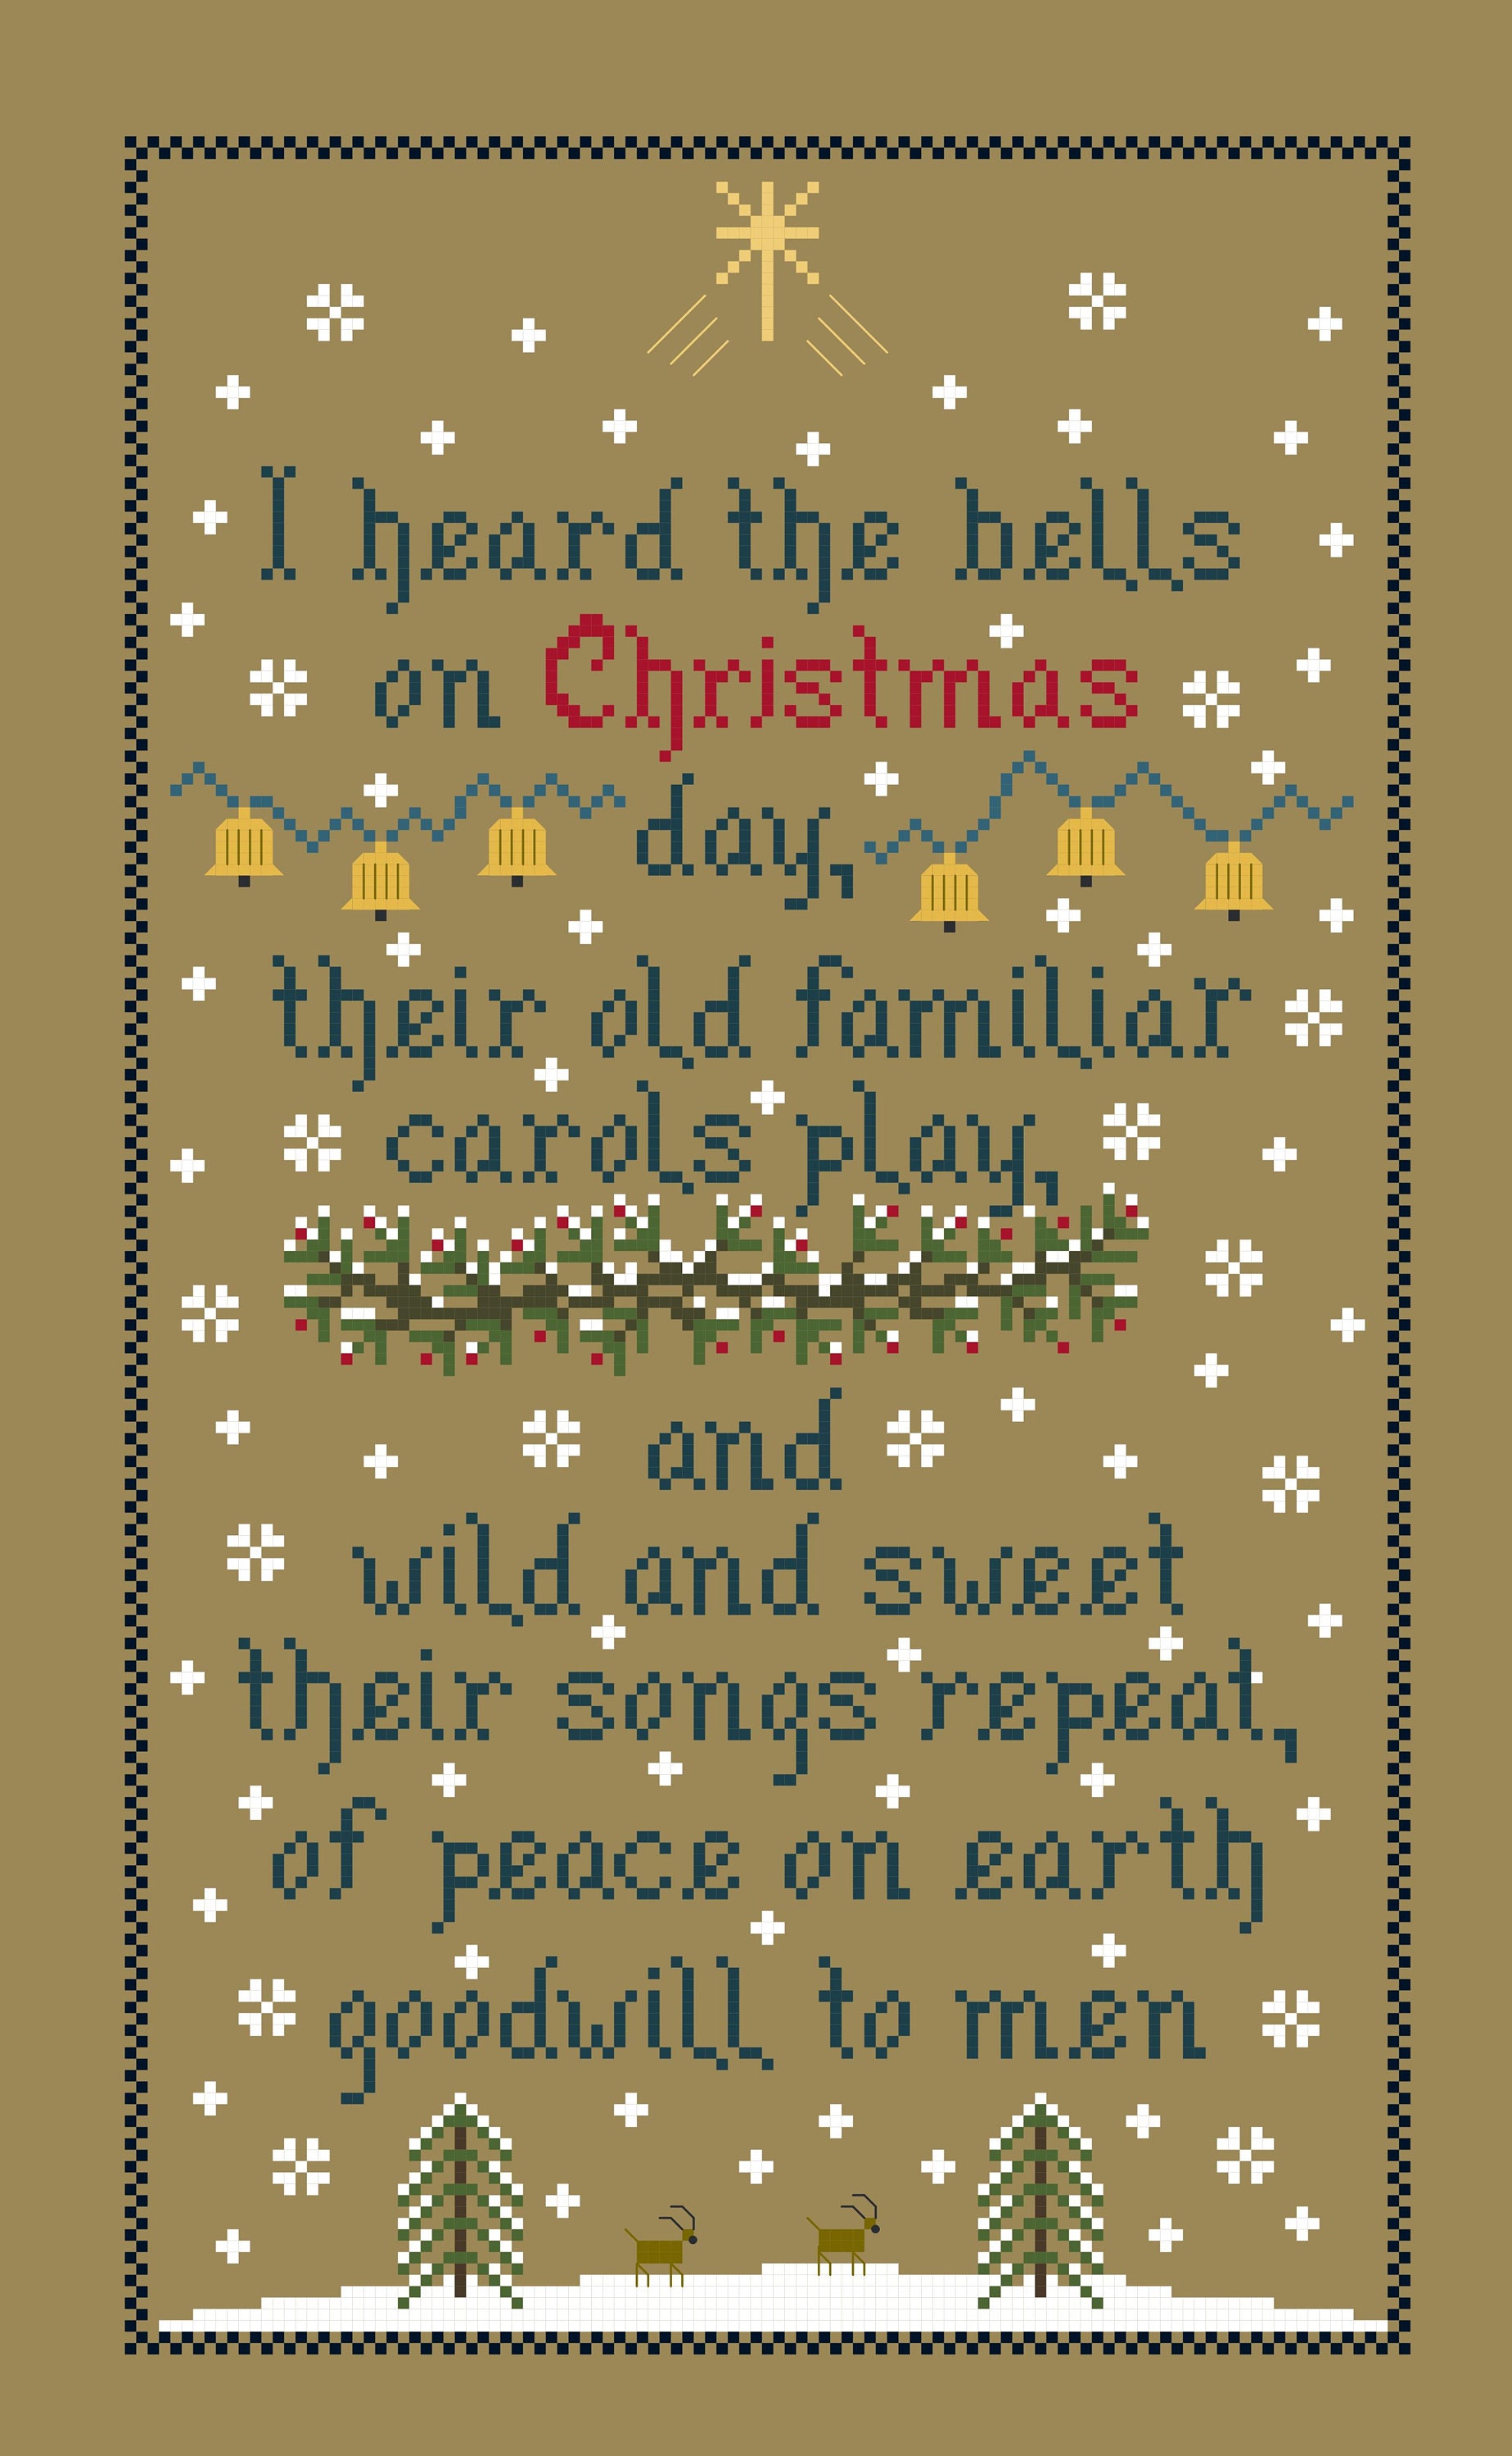 History Of The Christmas Bell - SirHoliday